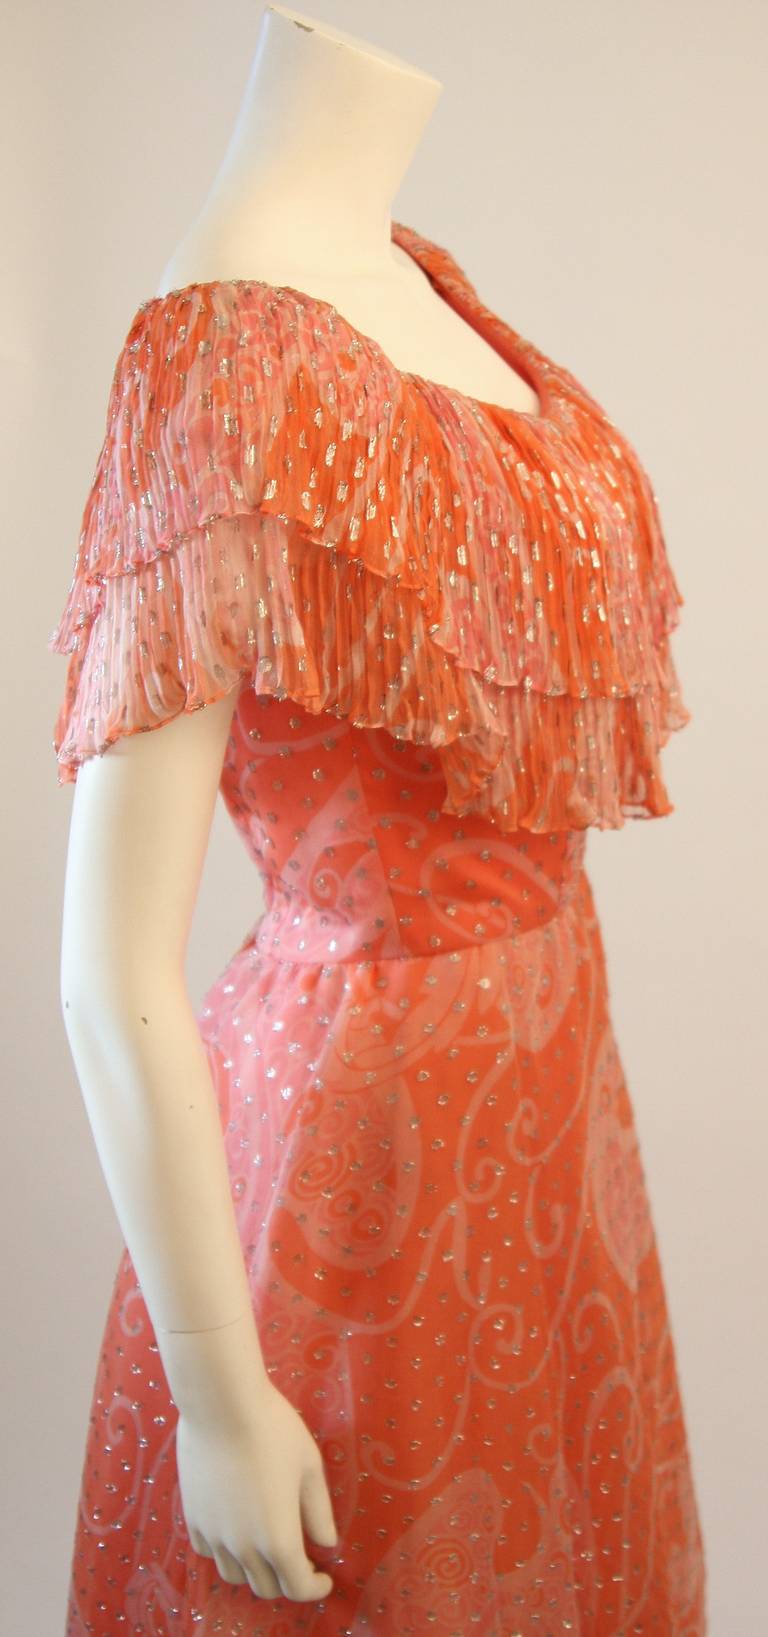 Orange Diane Dickerson Coral Chiffon Dress with Ruffle Size 6 For Sale